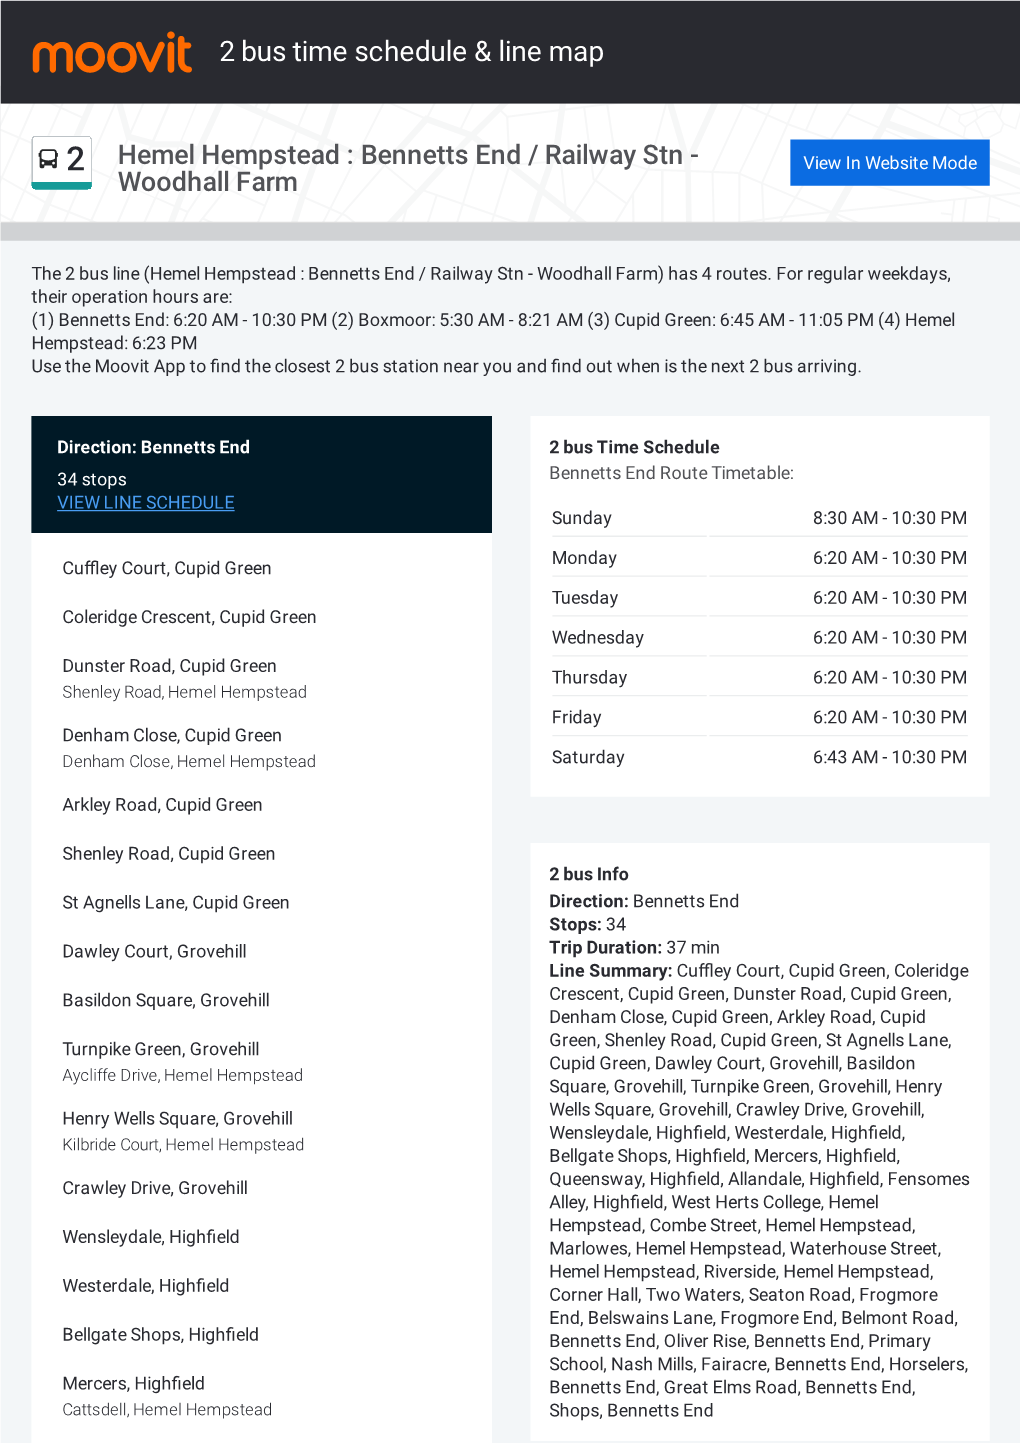 2 Bus Time Schedule & Line Route